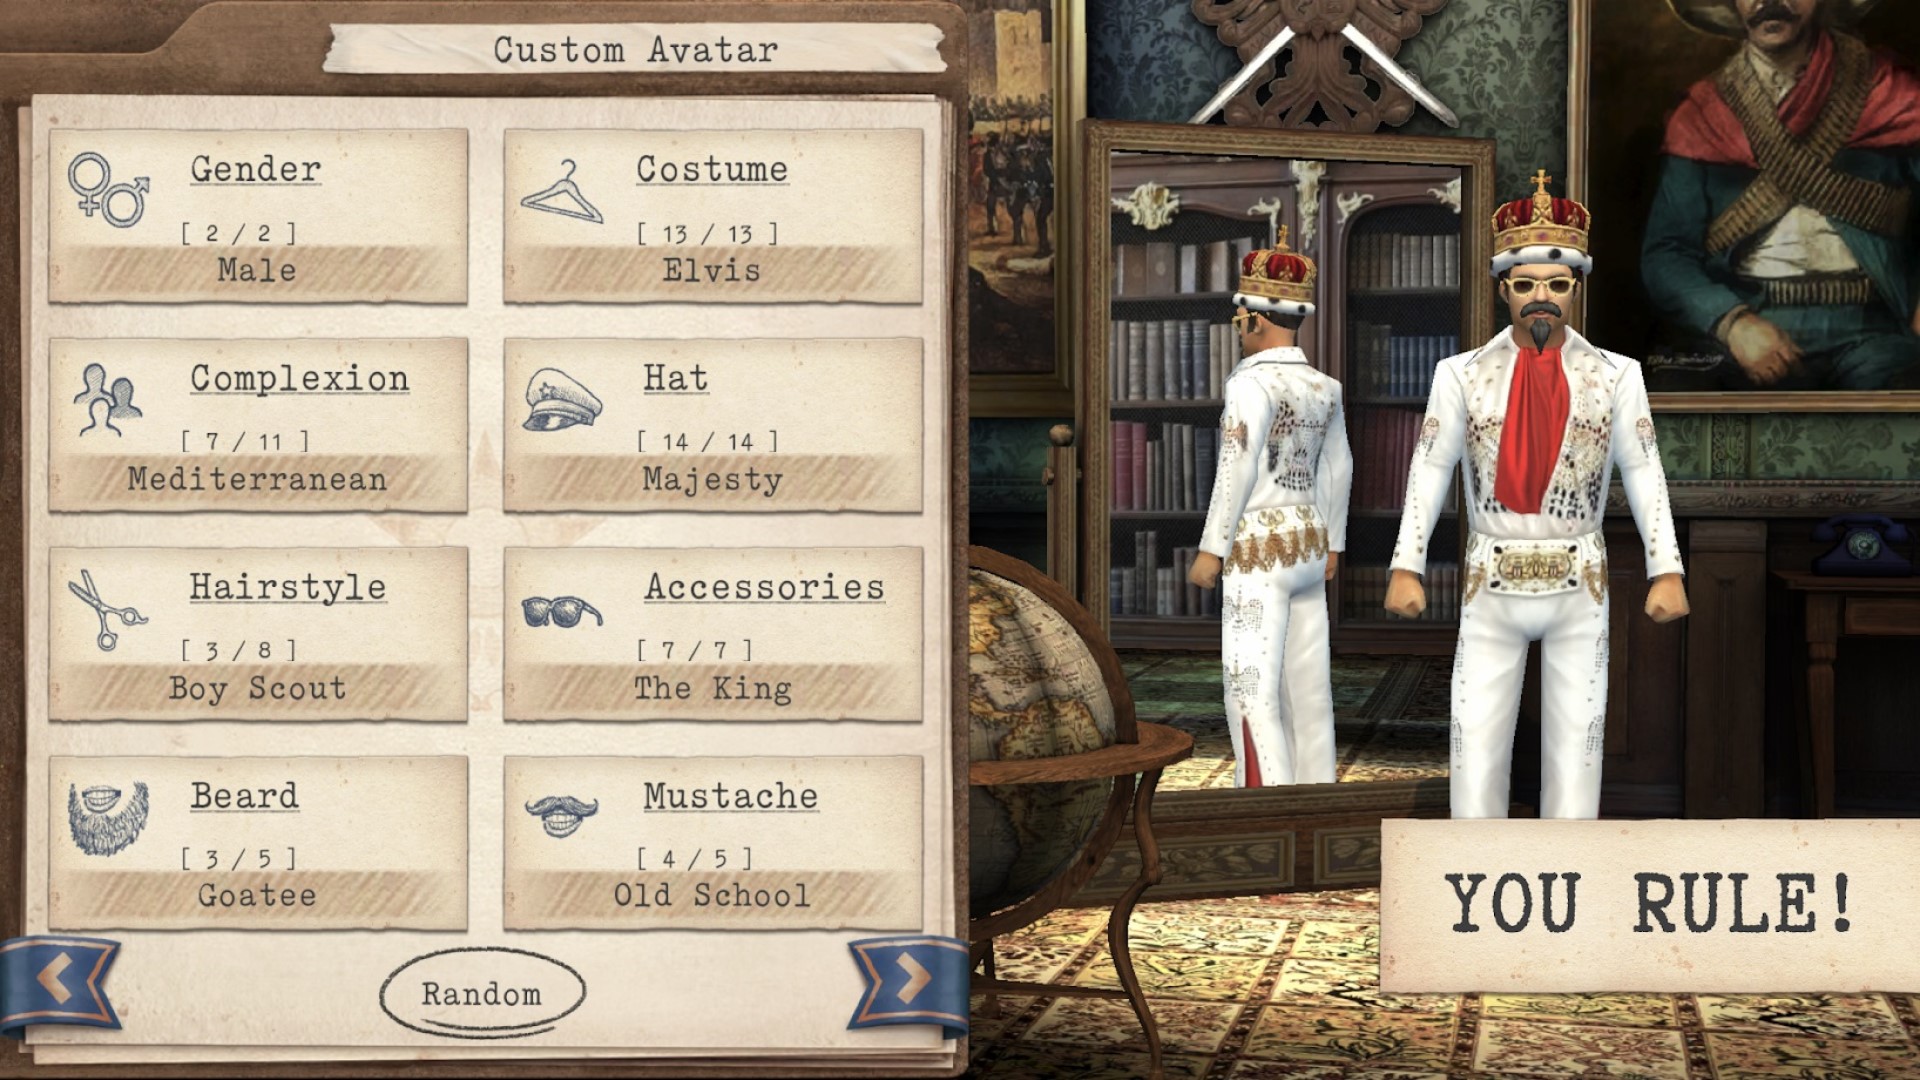 Best mobile strategy games: Tropico. Image shows a man dressed as Elvis Presley and wearing a crown on a character creation screen.